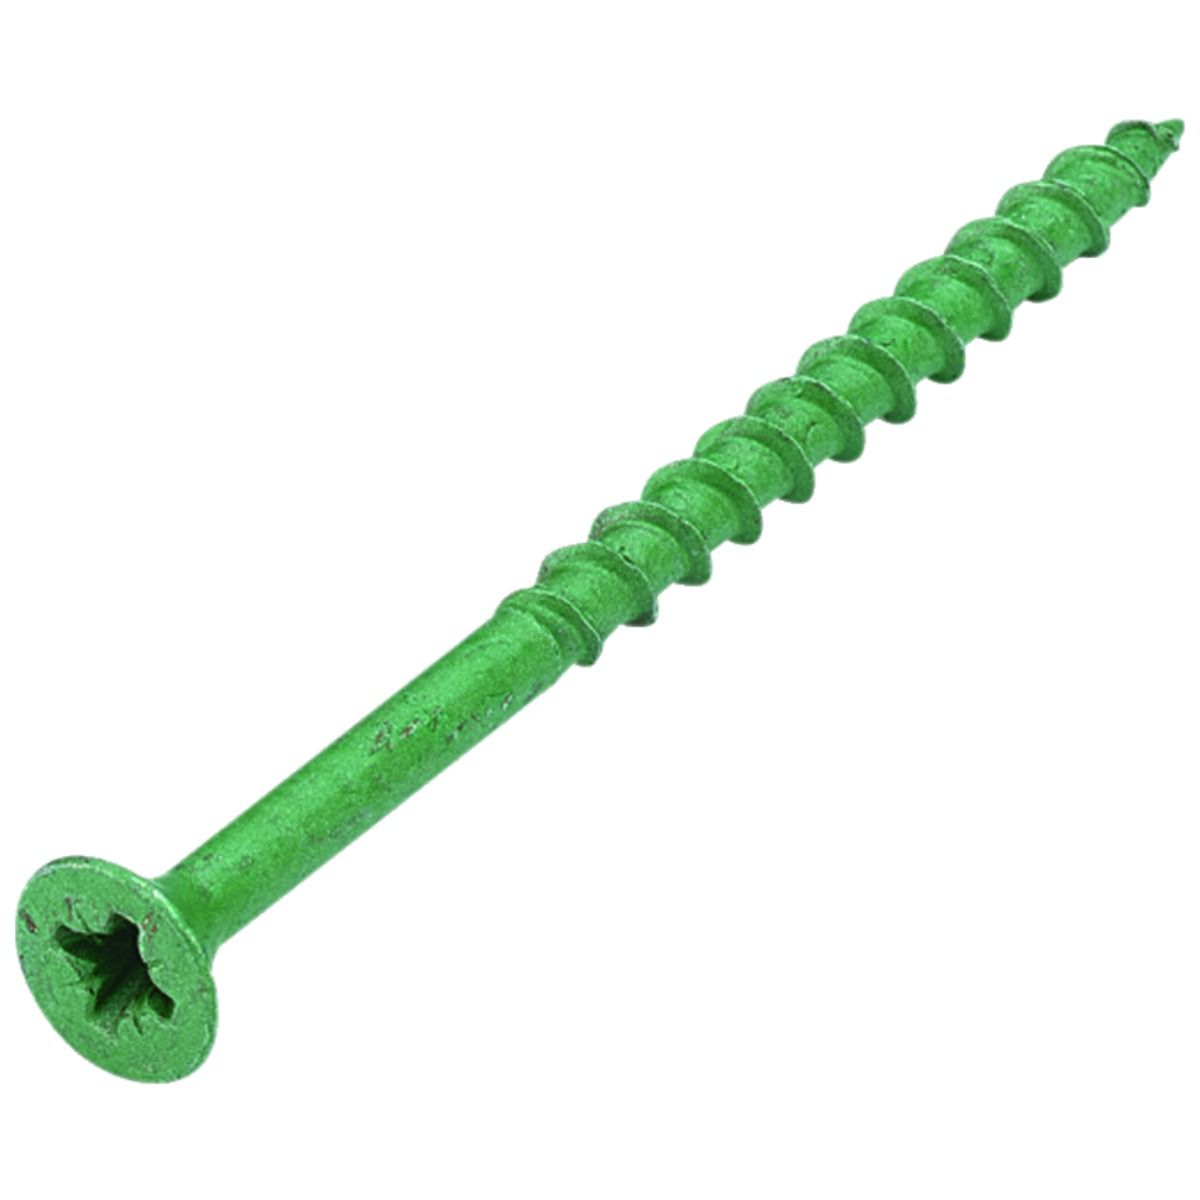 Image of Wickes External Grade Screws - Green No 10 x 50mm Pack of 20